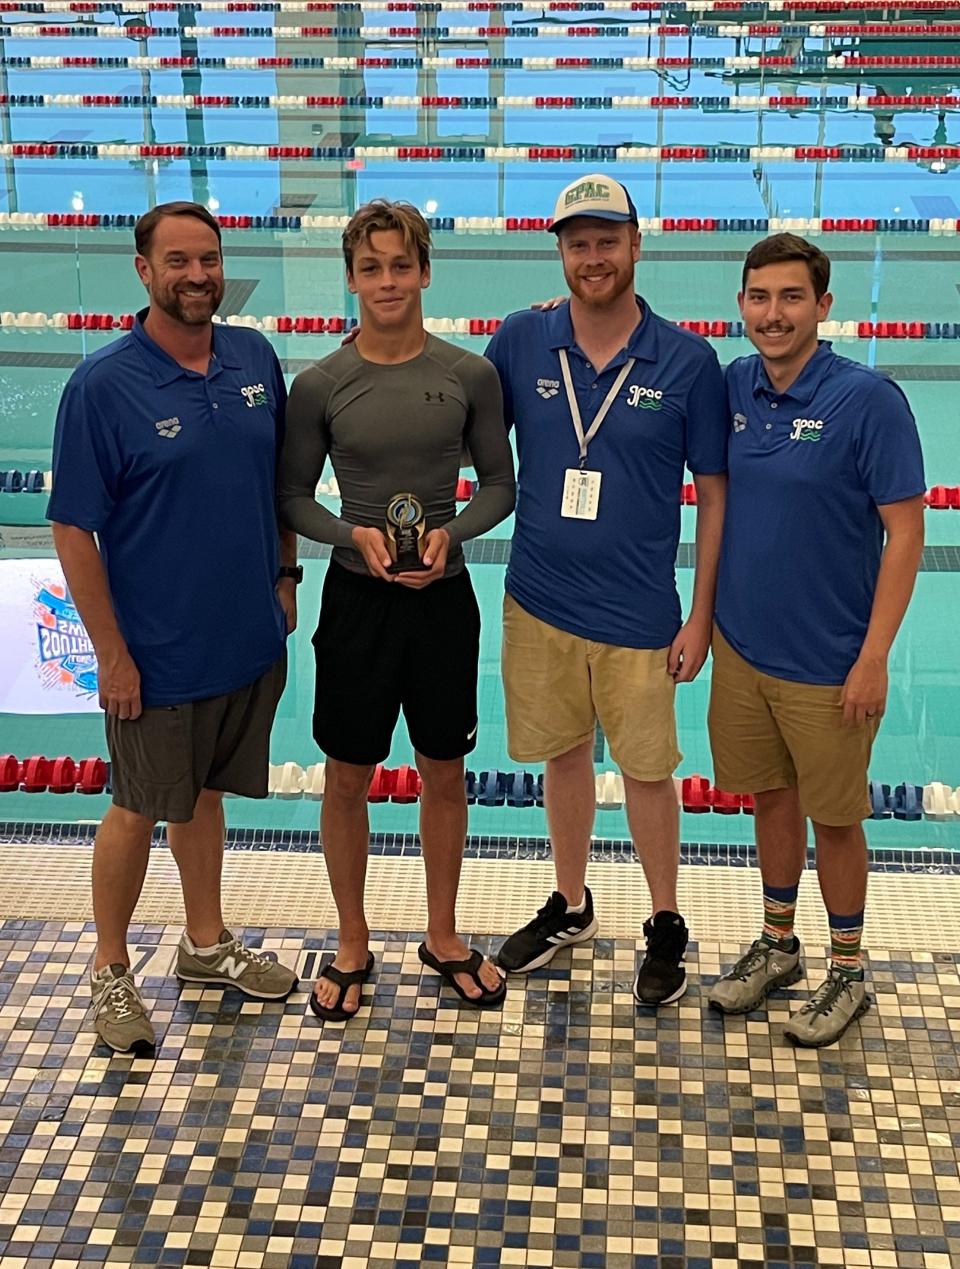 (From L to R) GPAC head coach Greg Johnson, 14-year old swimmer Ian Malone, head age group coach Nathan Smith and assistant coach Logan Cale pose for a photo at the end of the Southeastern Swimming Long Course Championships on July 17 at the Huntsville Aquatics Center from Huntsville, Ala..